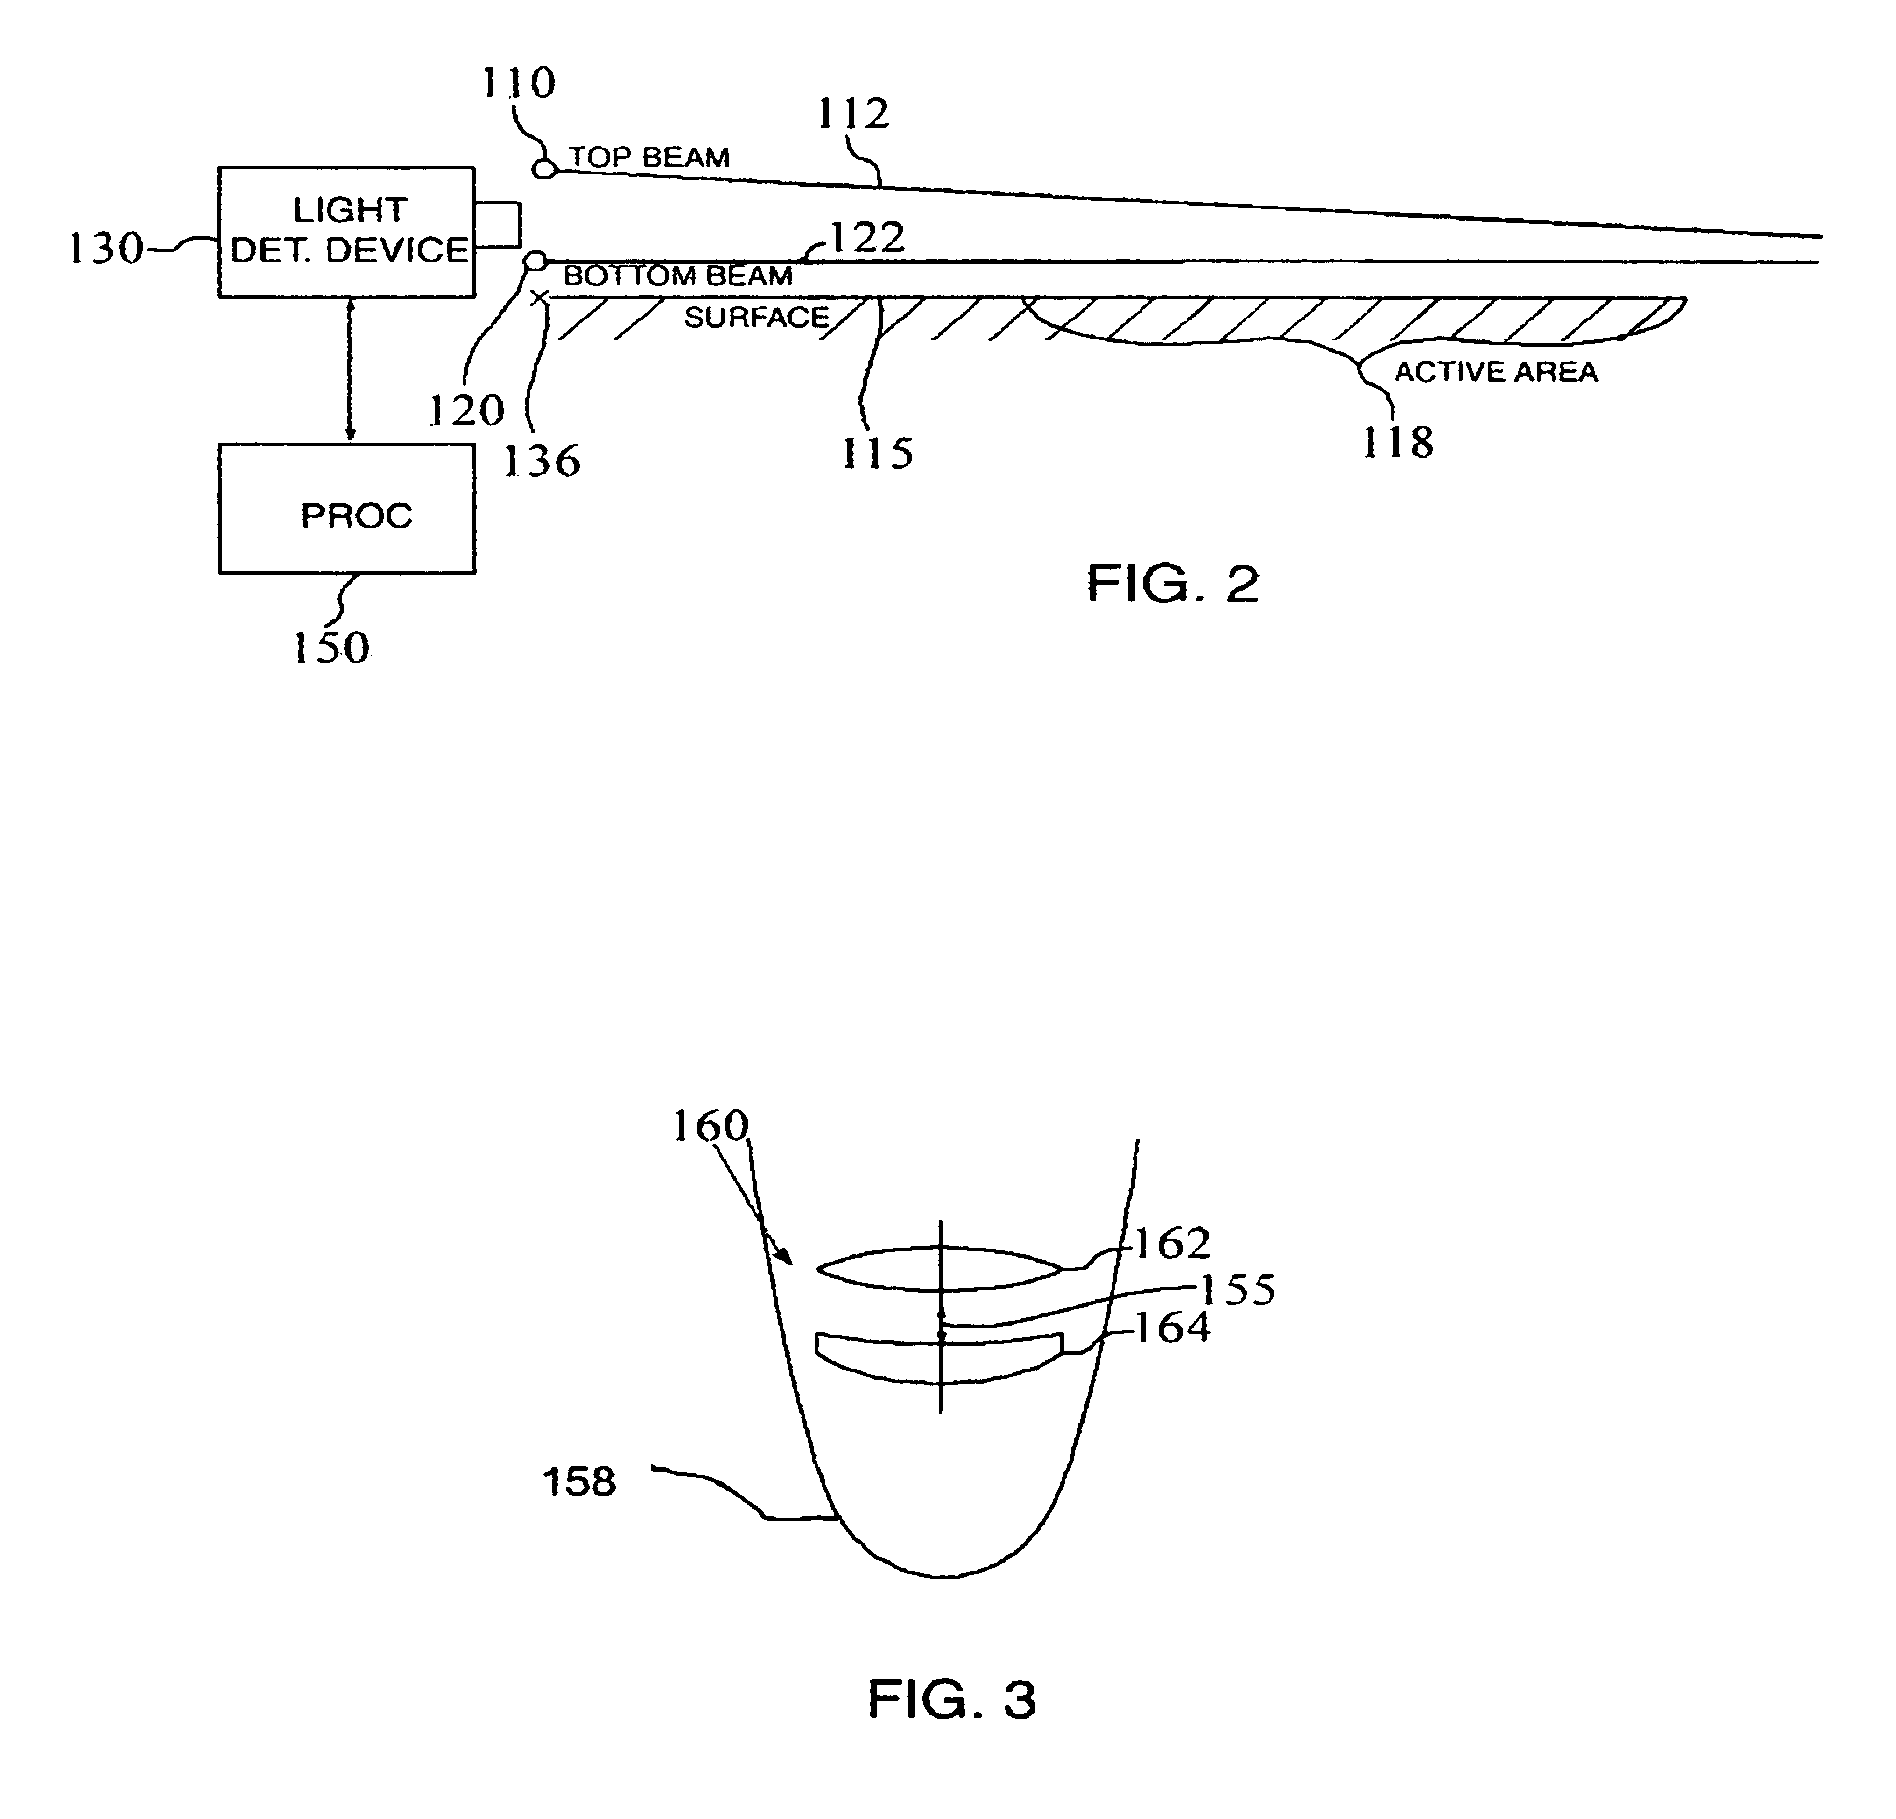 Method and apparatus for approximating depth of an object's placement onto a monitored region with applications to virtual interface devices